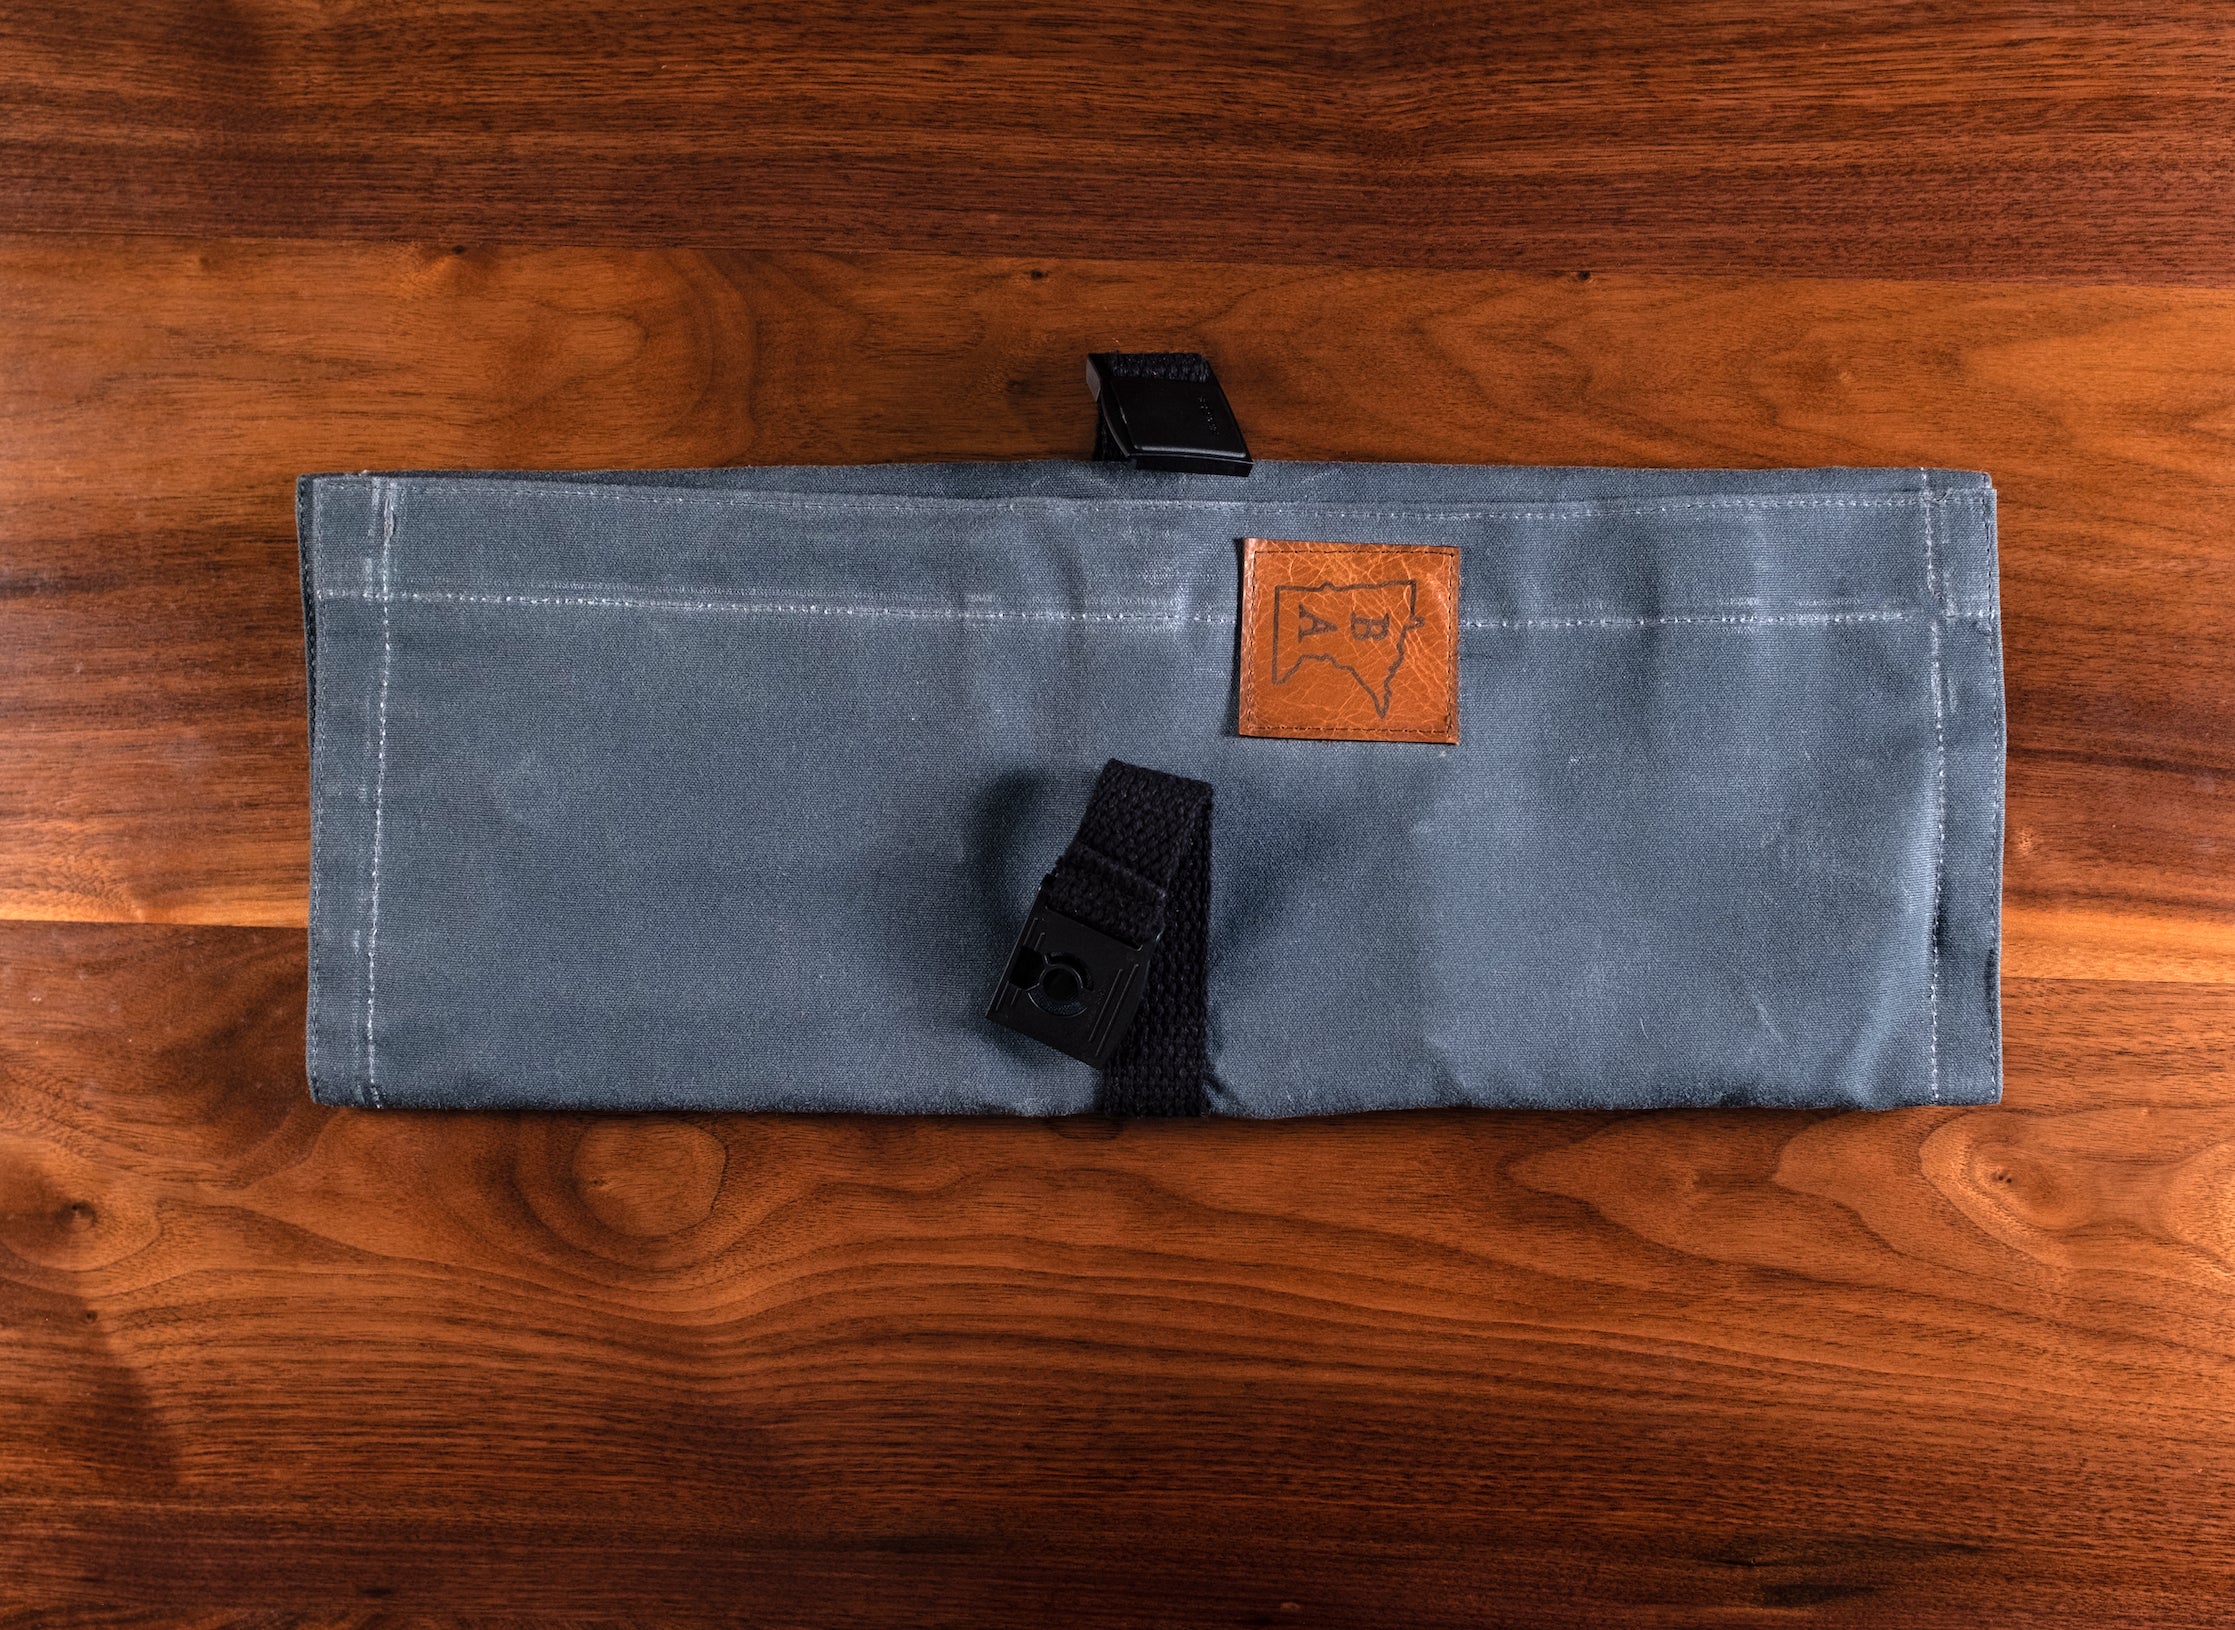 The slate Side Hustle knife roll, designed by Craftmade Aprons in Minnesota, laying unbuckled on a wooden surface.